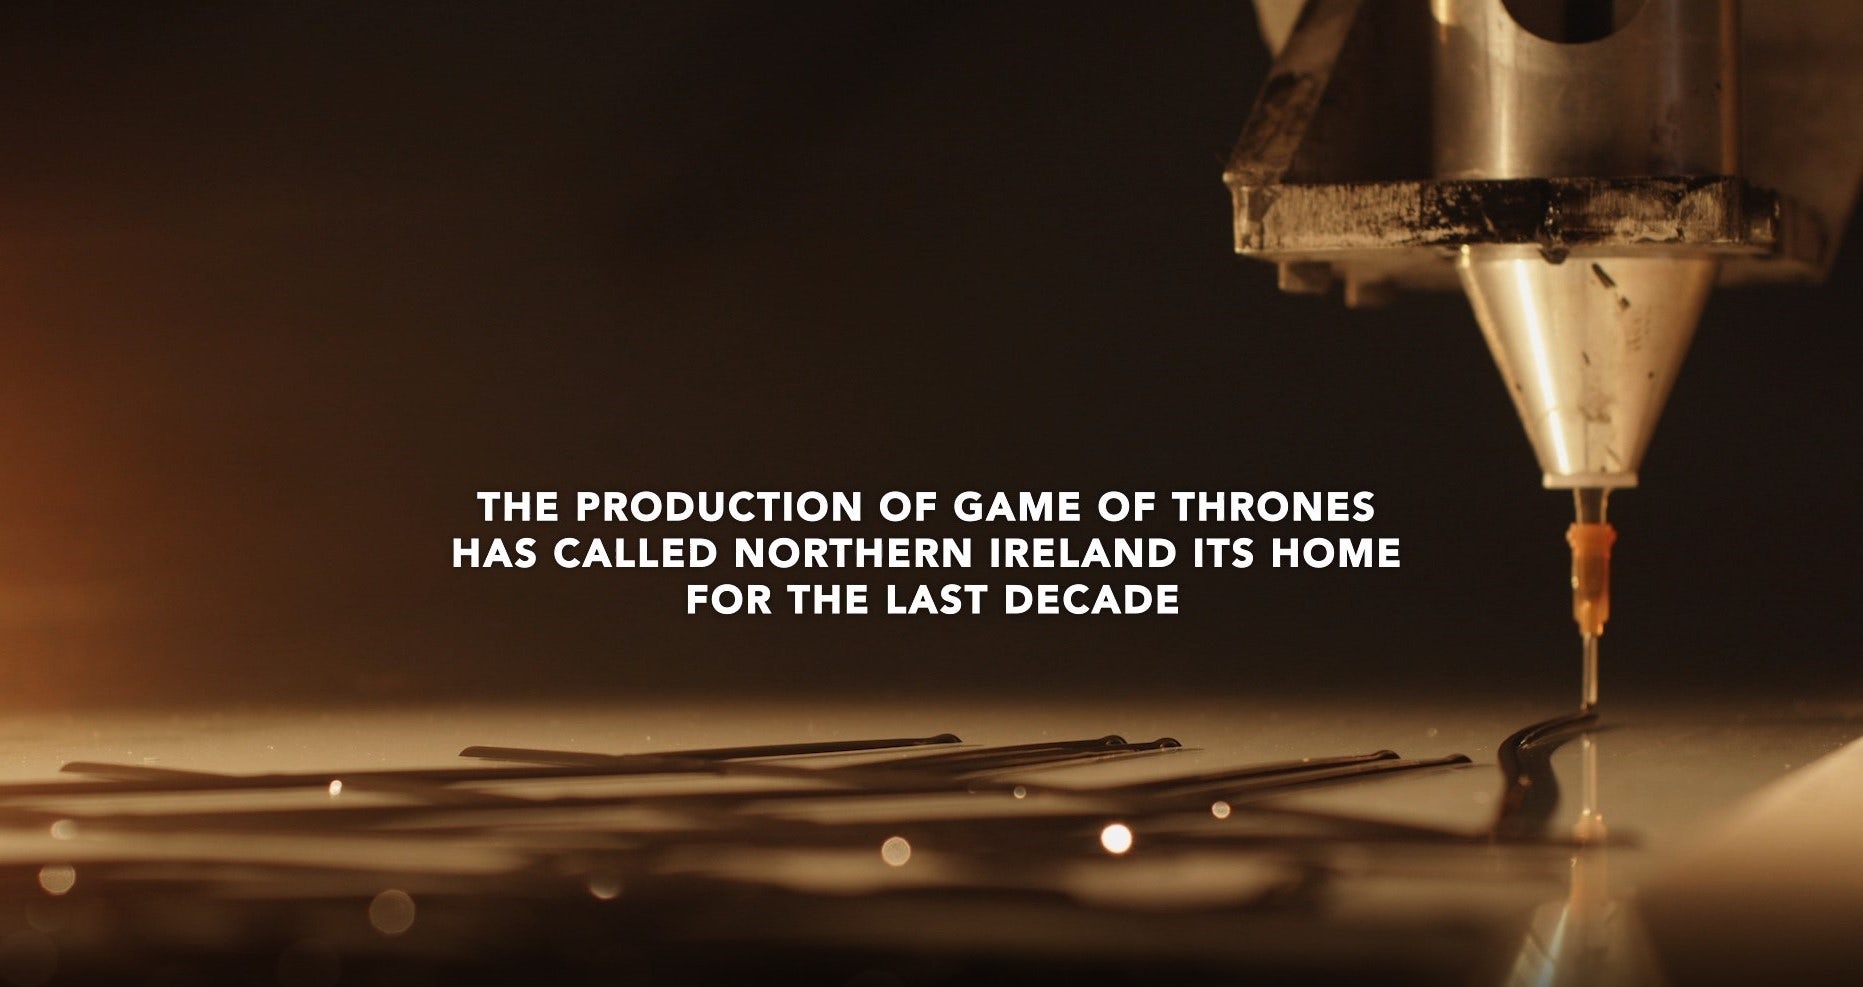 The Many Accolades of “Game of Thrones”, by We THRONES